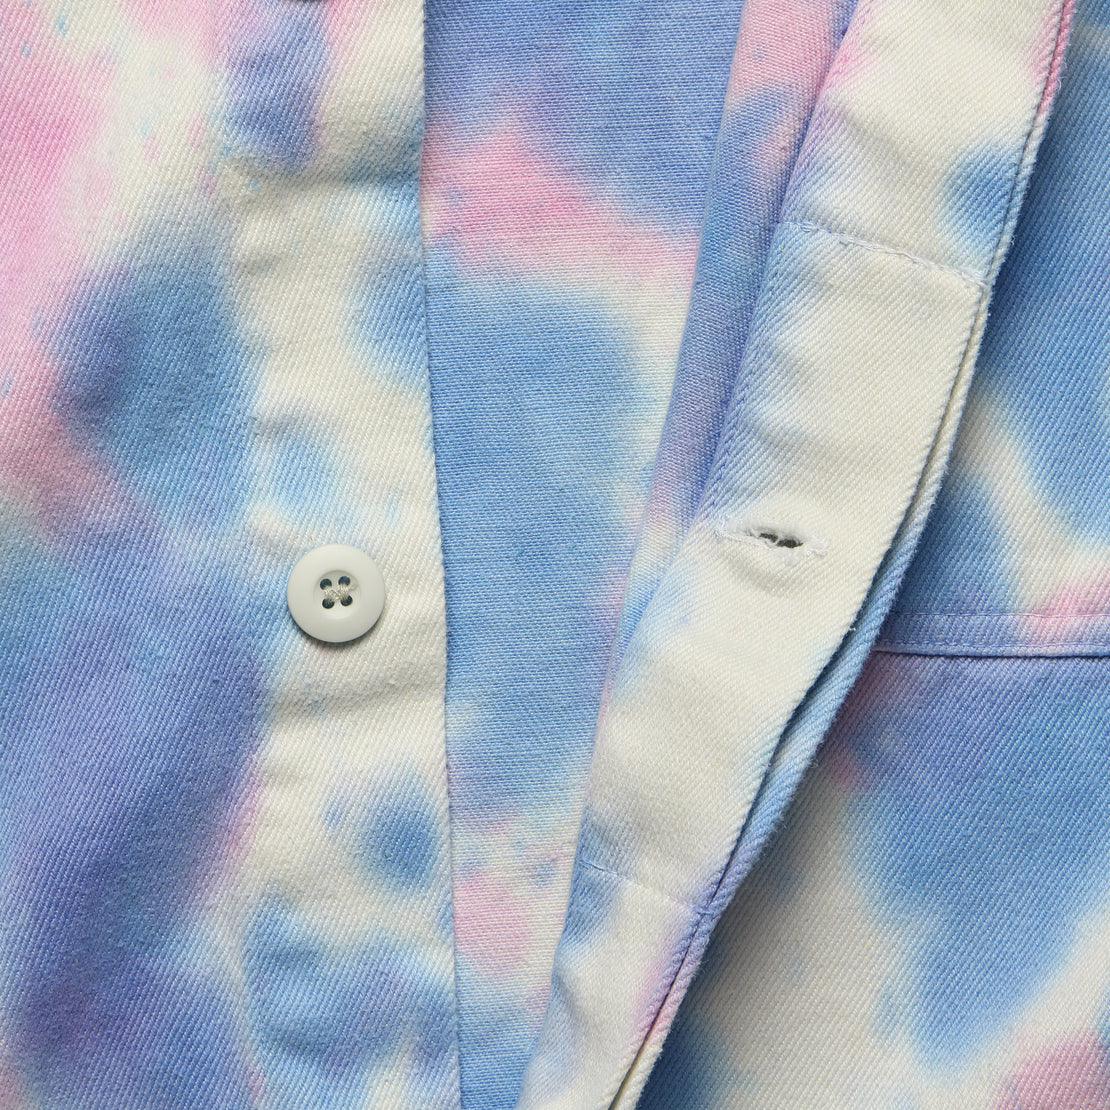 Olympic Jacket - Spacesuit Tie Dye - Jungmaven - STAG Provisions - Outerwear - Coat / Jacket